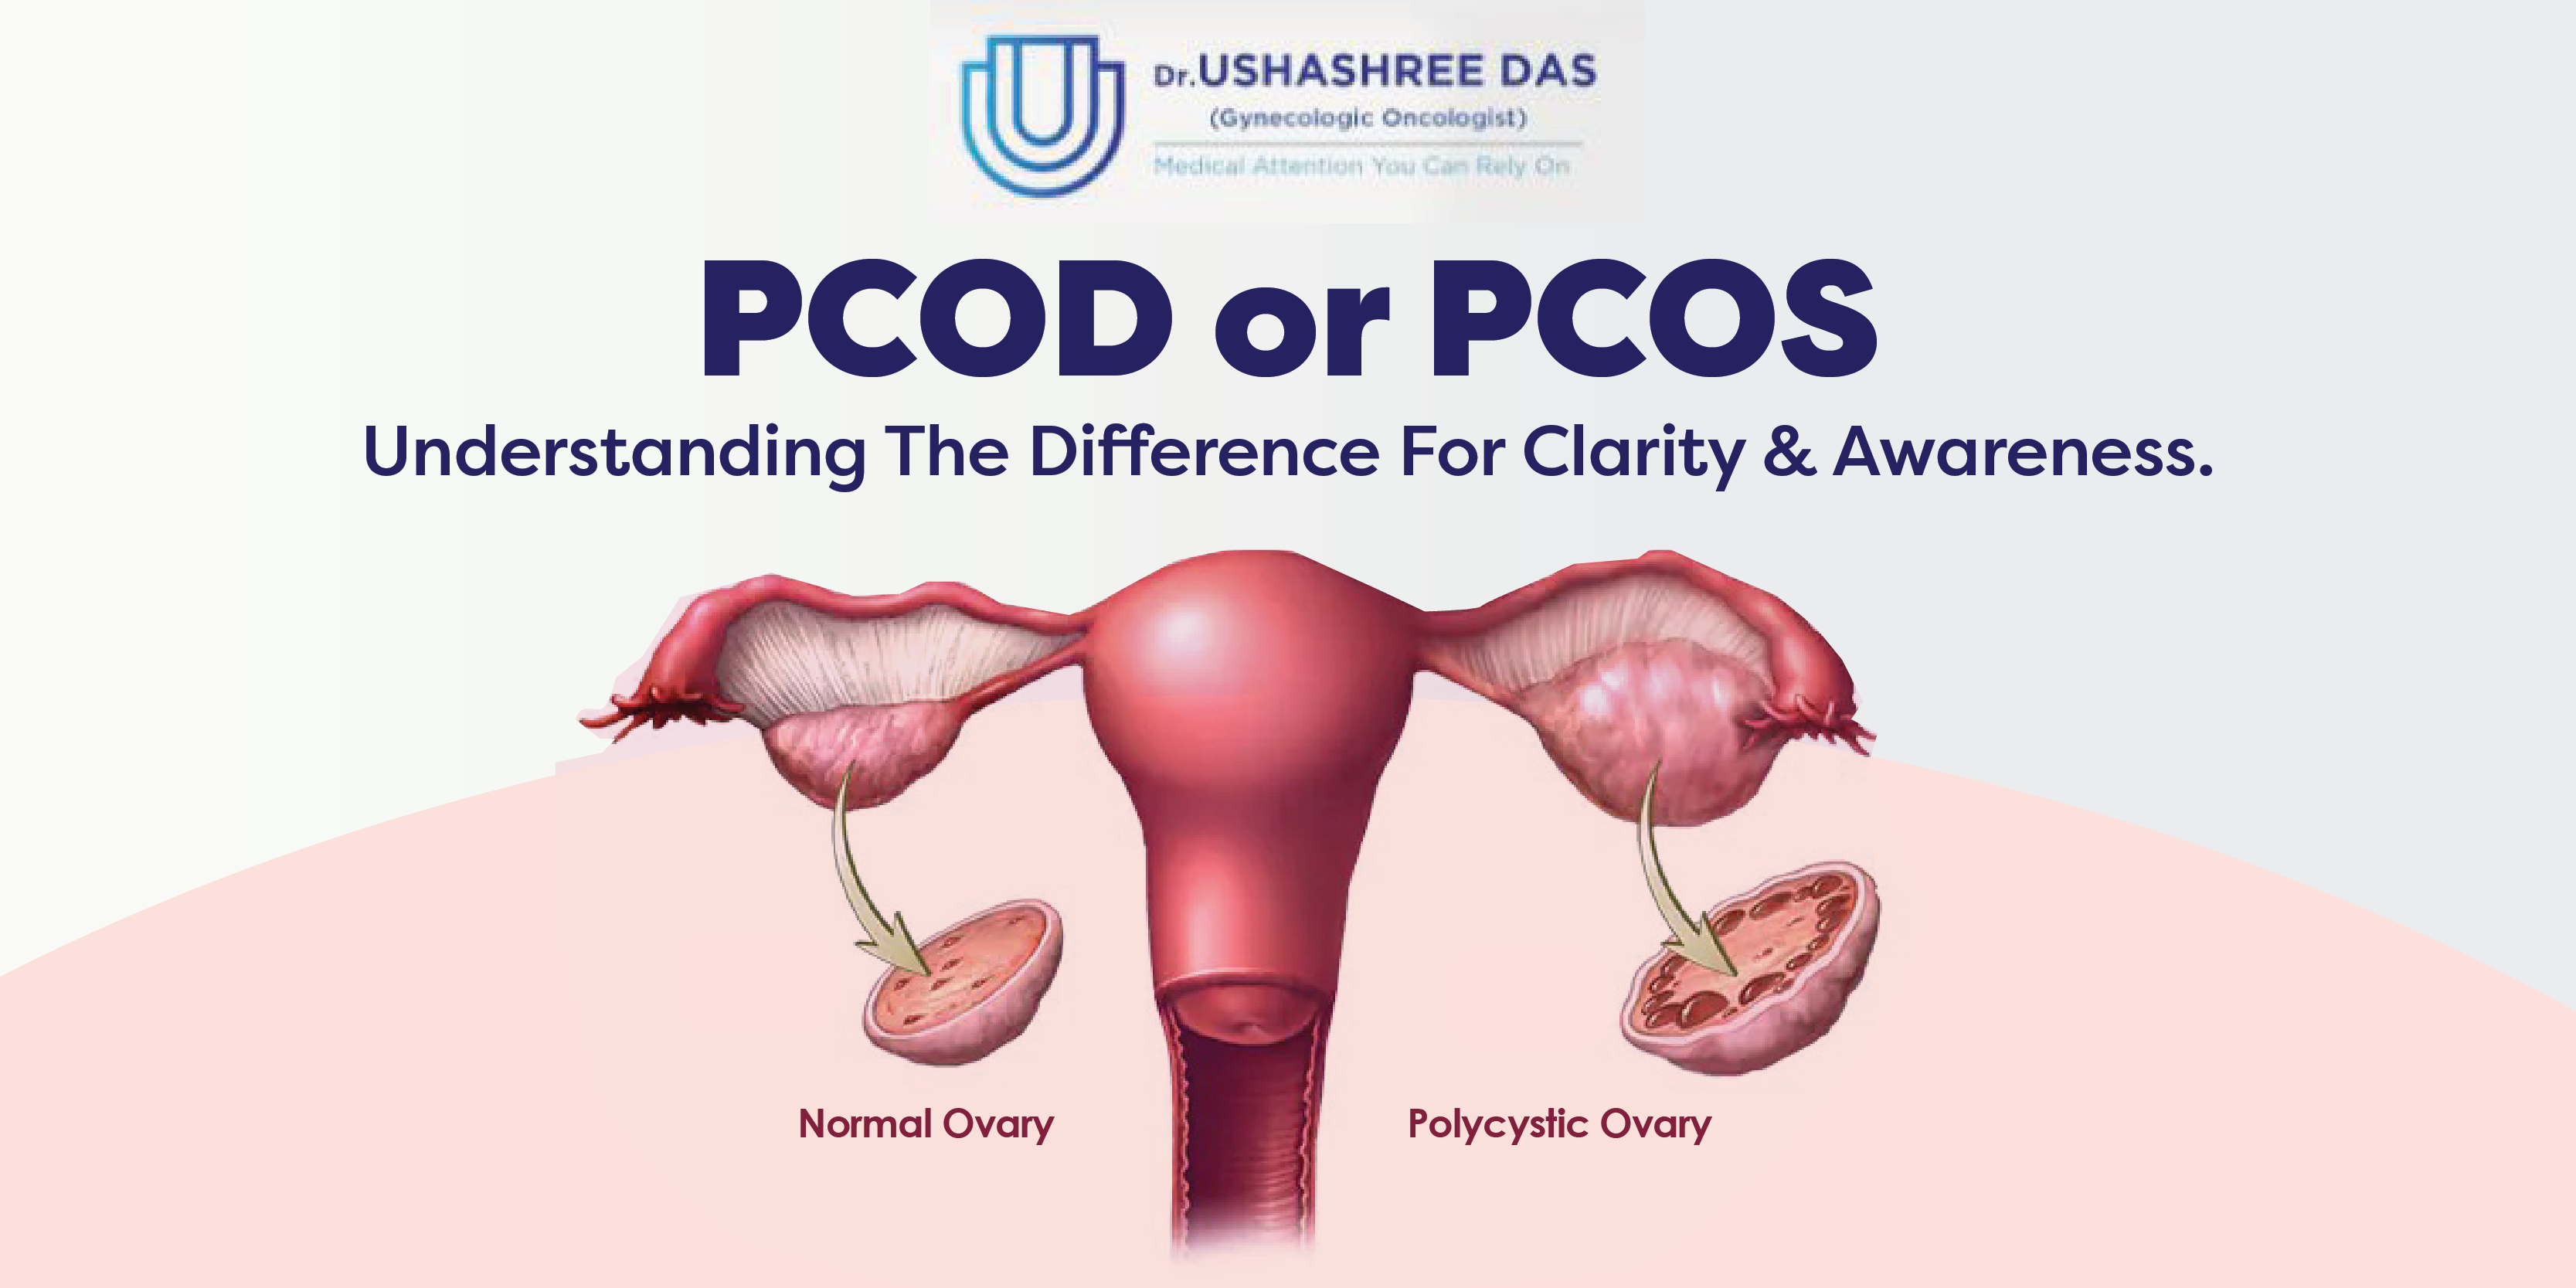 PCOD vs PCOS: What Is The Difference?